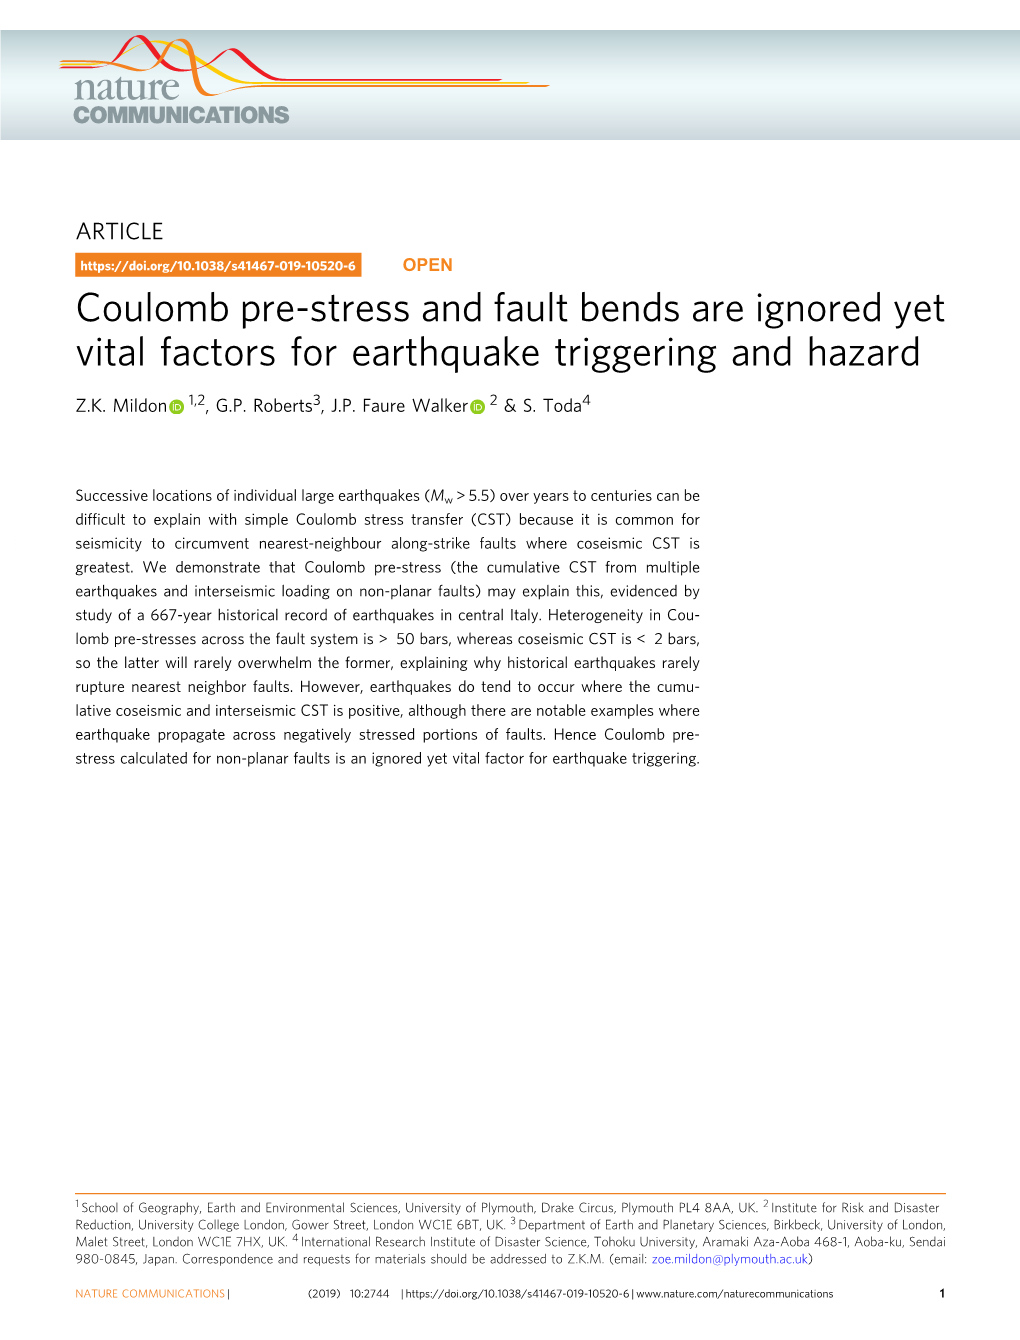 Coulomb Pre-Stress and Fault Bends Are Ignored Yet Vital Factors for Earthquake Triggering and Hazard